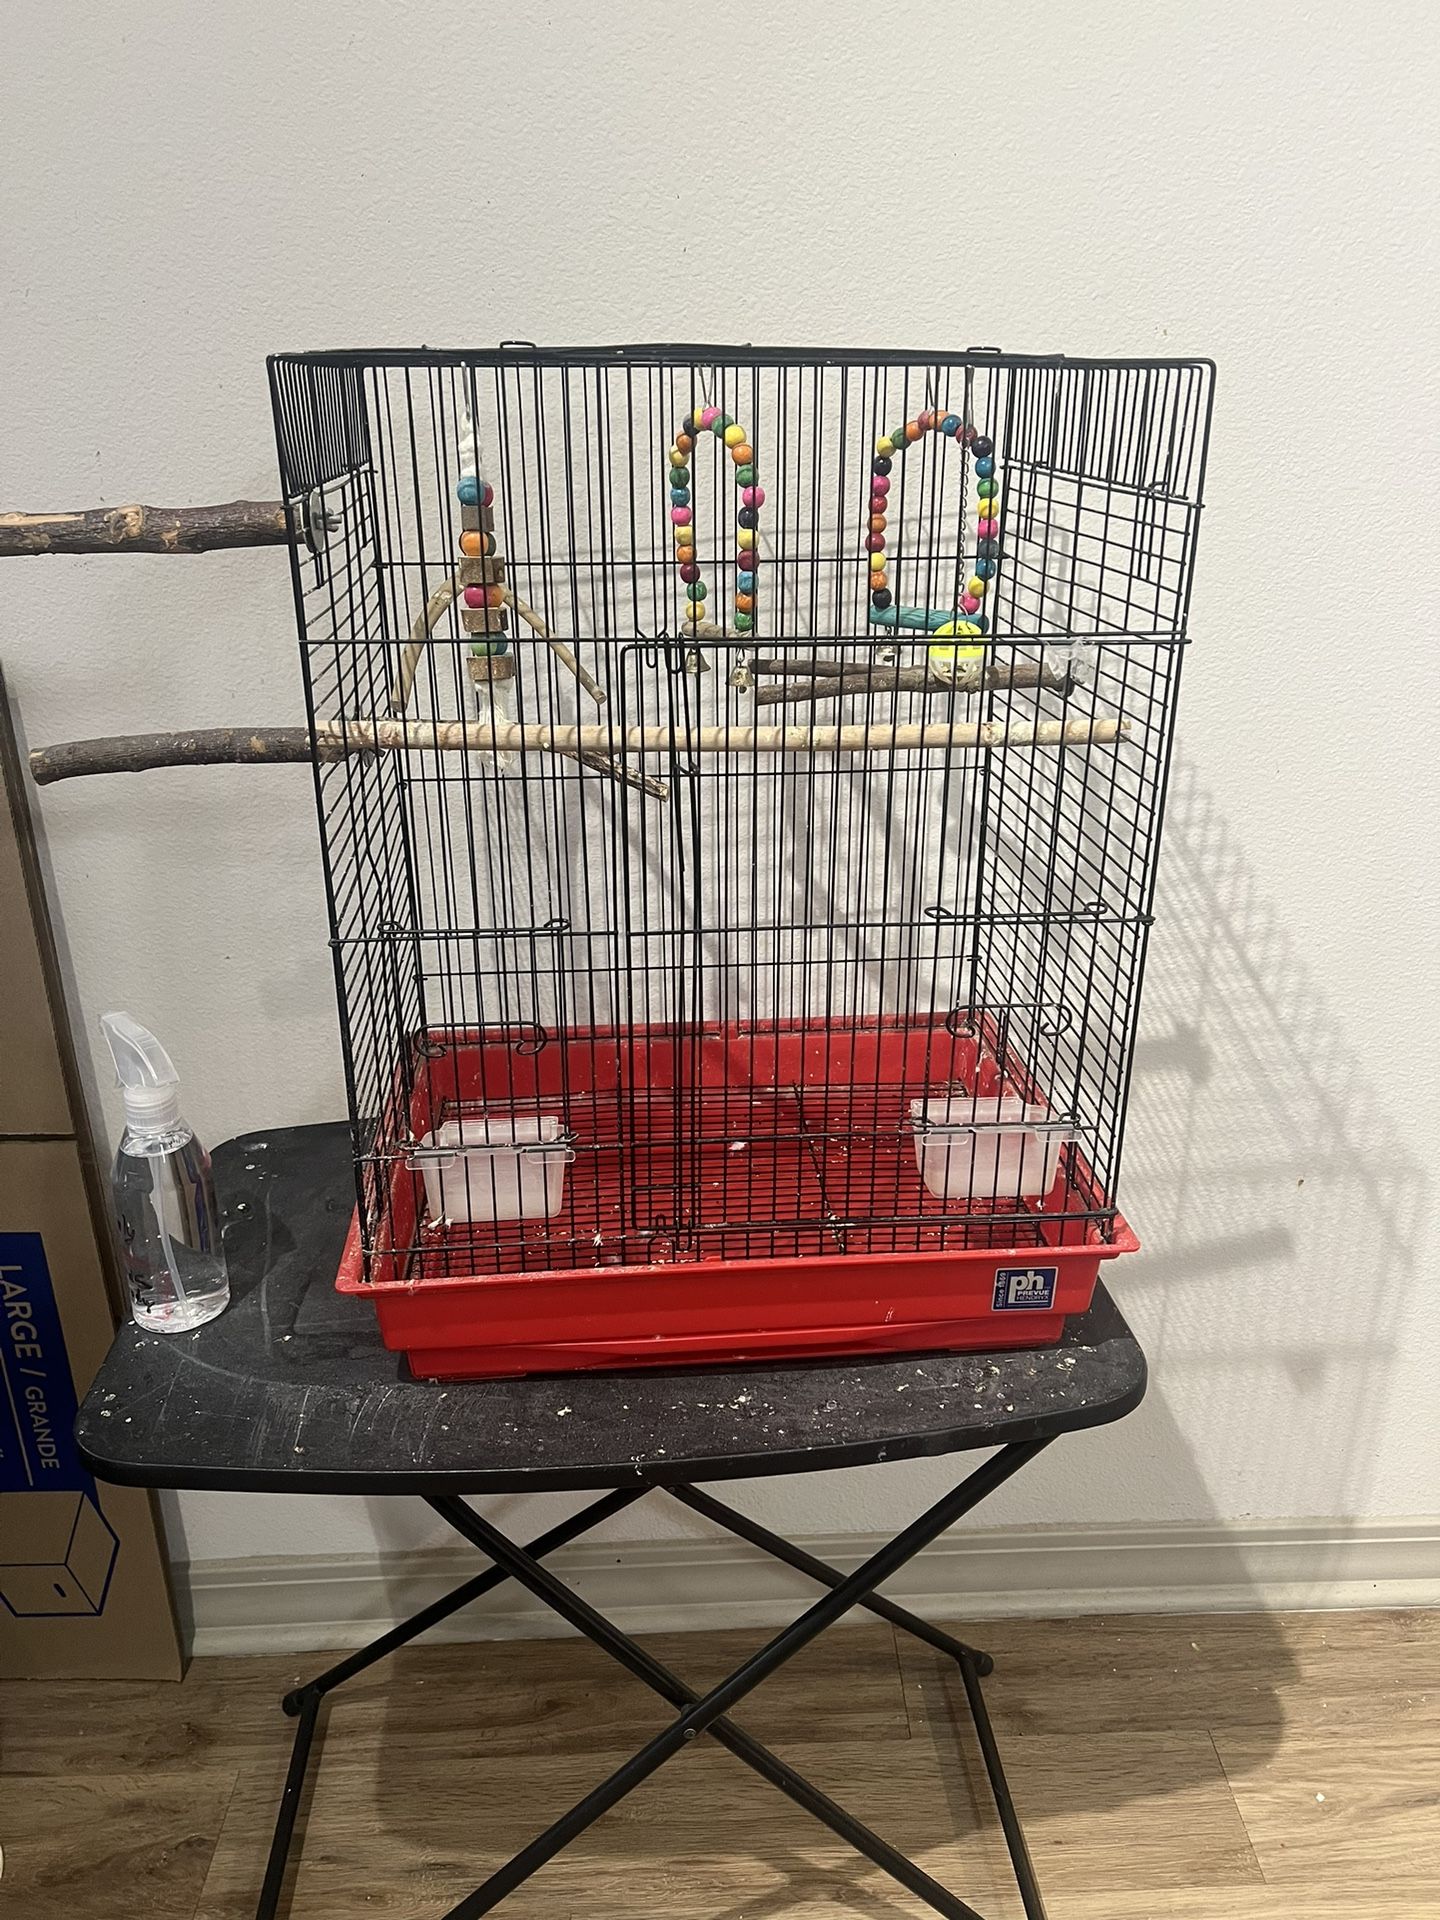 Birds Cage With Toys 